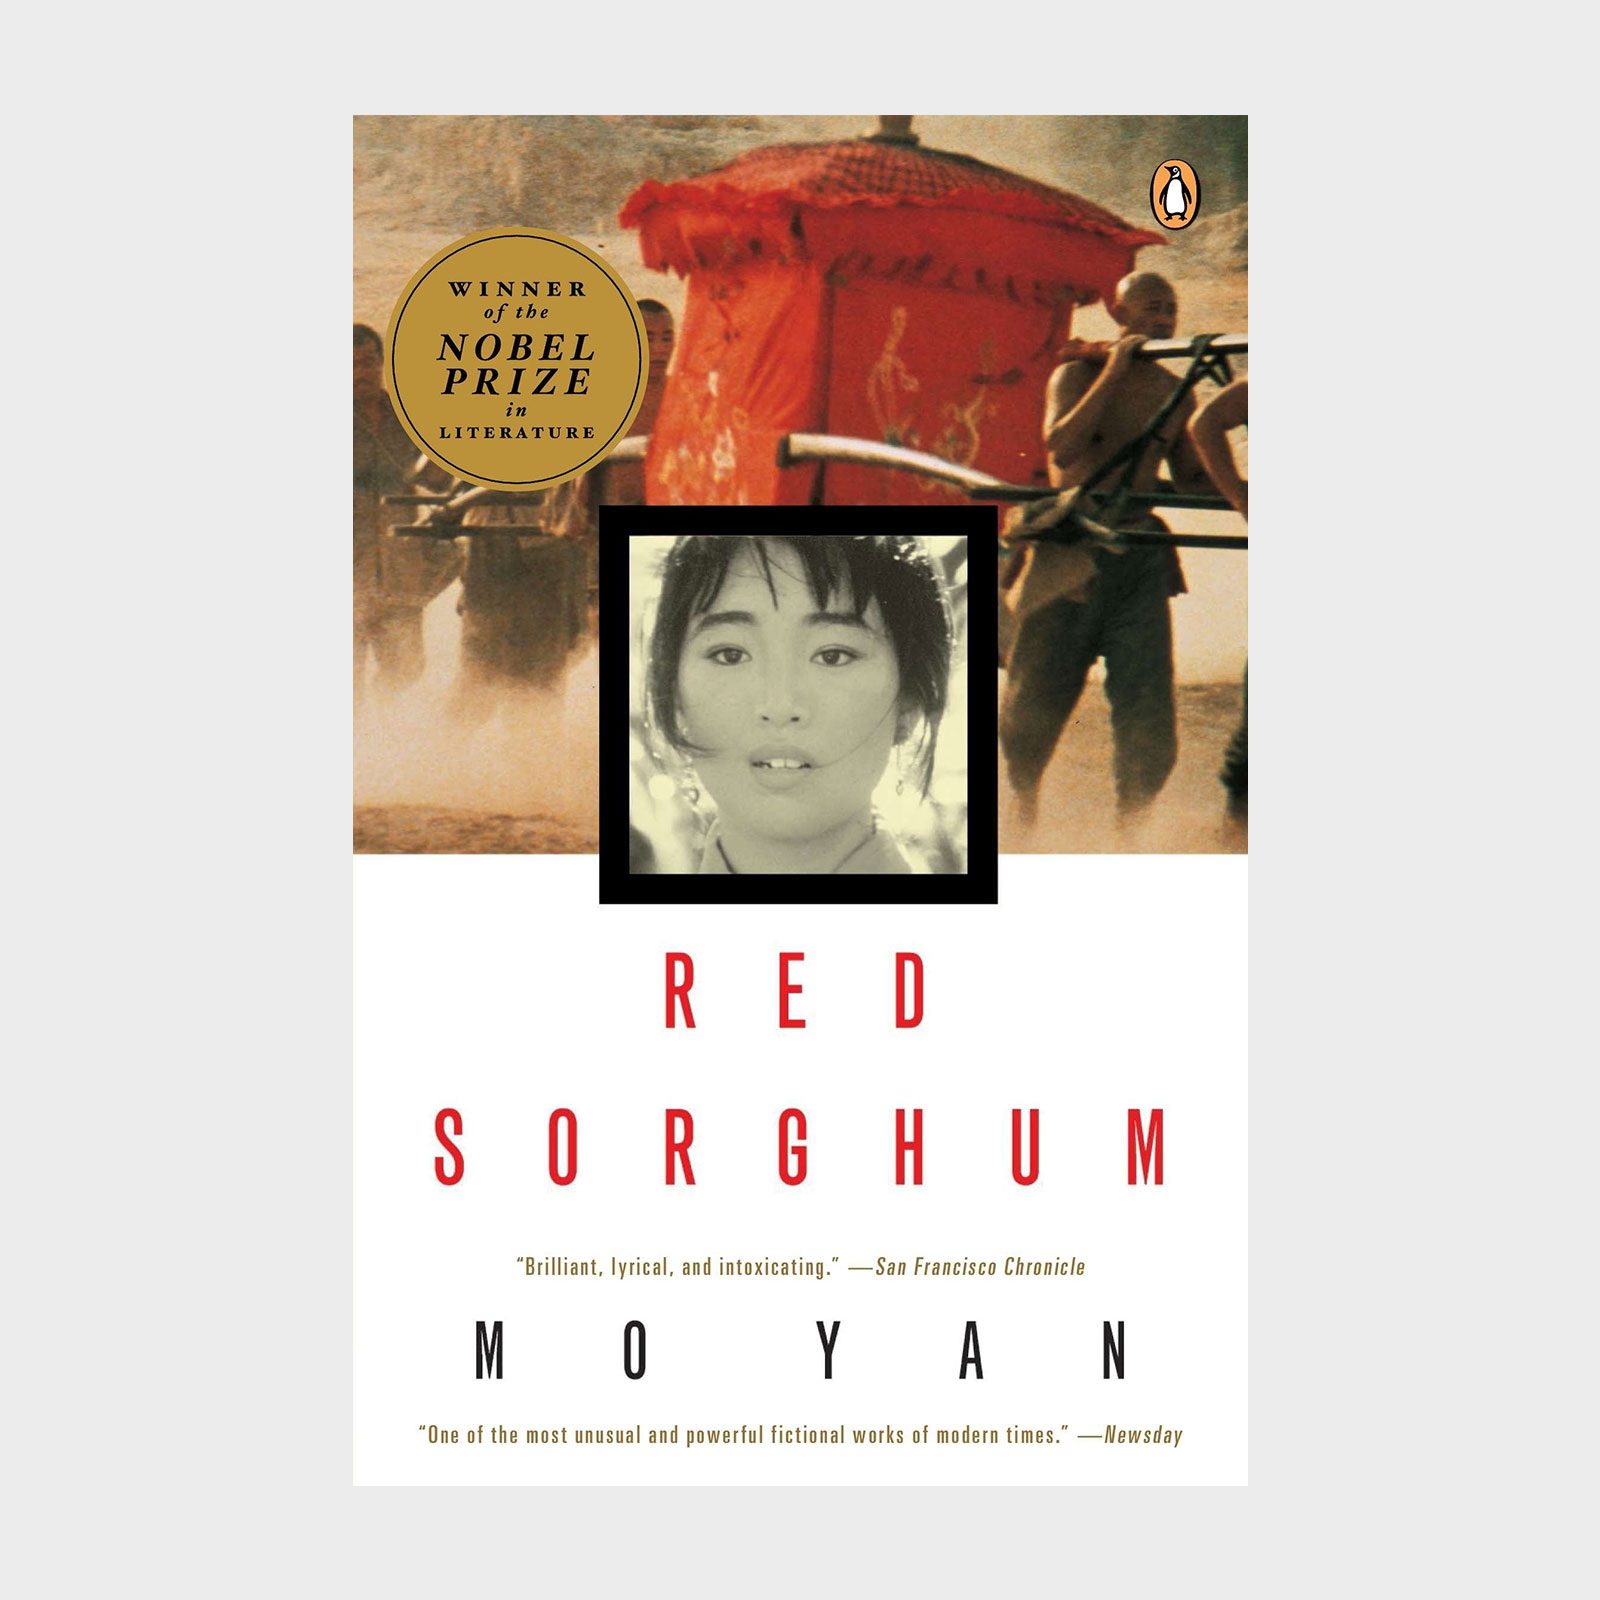 <p>Published in 1986 by Mo Yan (author Guan Moye's pen name, which translates to "don't speak"), <a href="https://www.amazon.com/Red-Sorghum-Novel-Mo-Yan/dp/0140168540" rel="noopener noreferrer"><em>Red Sorghum</em></a> centers on three generations of the Shandong family as they move from red sorghum liquor producers to freedom fighters of the second Sino-Japanese war. Through a series of flashbacks, the narrator recounts the lives of his grandparents and the horrors of war. Read the book first—Yan became the first Chinese author to win the coveted Nobel Prize in Literature in 2012—then when you're done, catch the 1986 <a href="https://www.rd.com/list/hit-movies-that-were-books-first/" rel="noopener noreferrer">movie adaptation</a>.</p> <p class="listicle-page__cta-button-shop"><a class="shop-btn" href="https://www.amazon.com/Red-Sorghum-Novel-Mo-Yan/dp/0140168540">Shop Now</a></p>